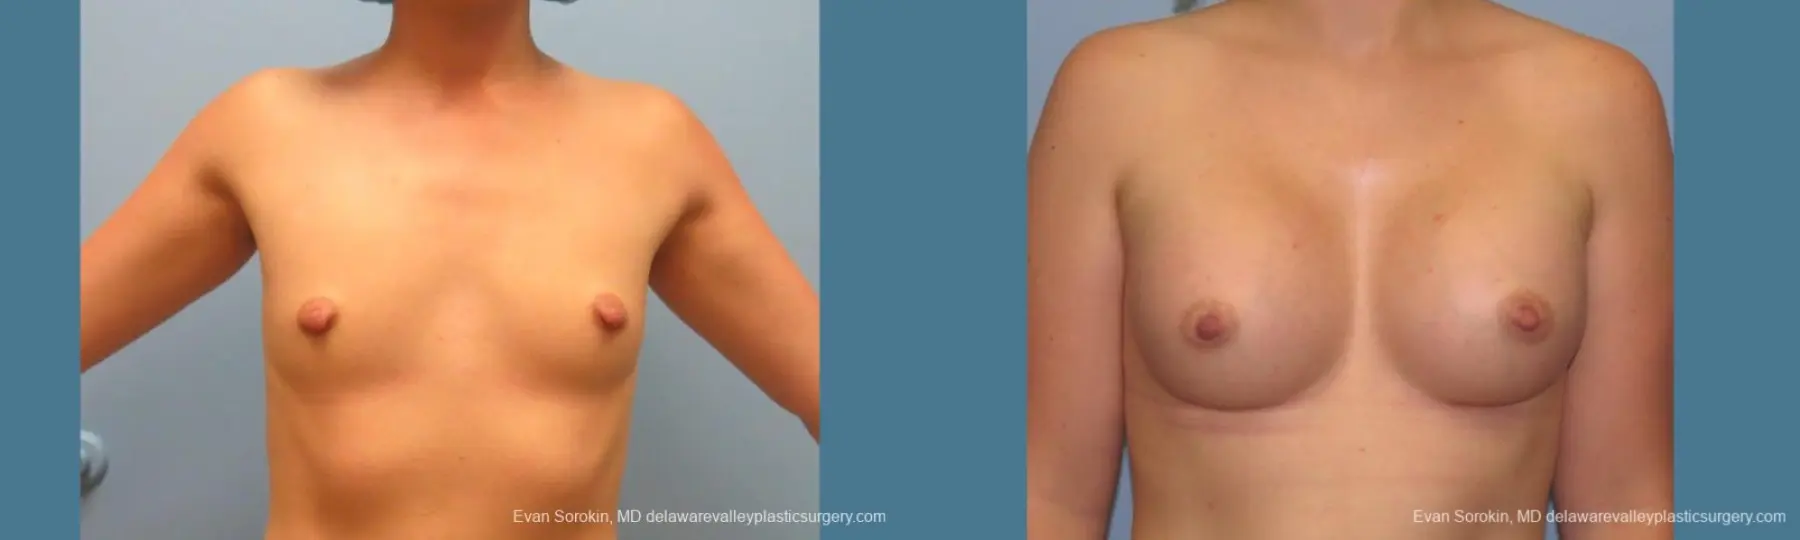 Philadelphia Breast Augmentation 10193 - Before and After 1